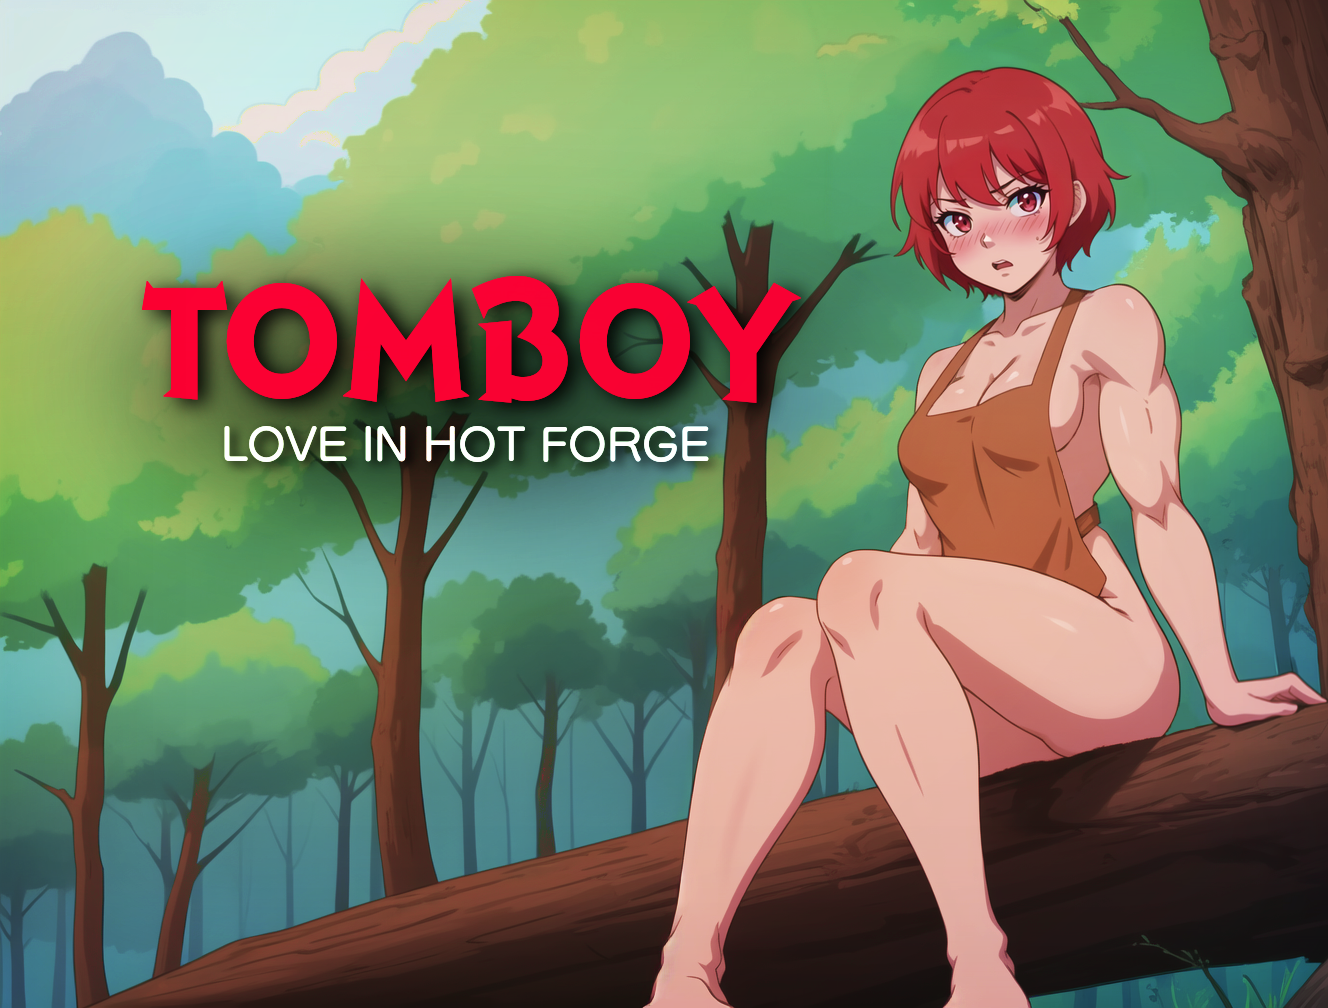 Tomboy: Love in Hot Forge